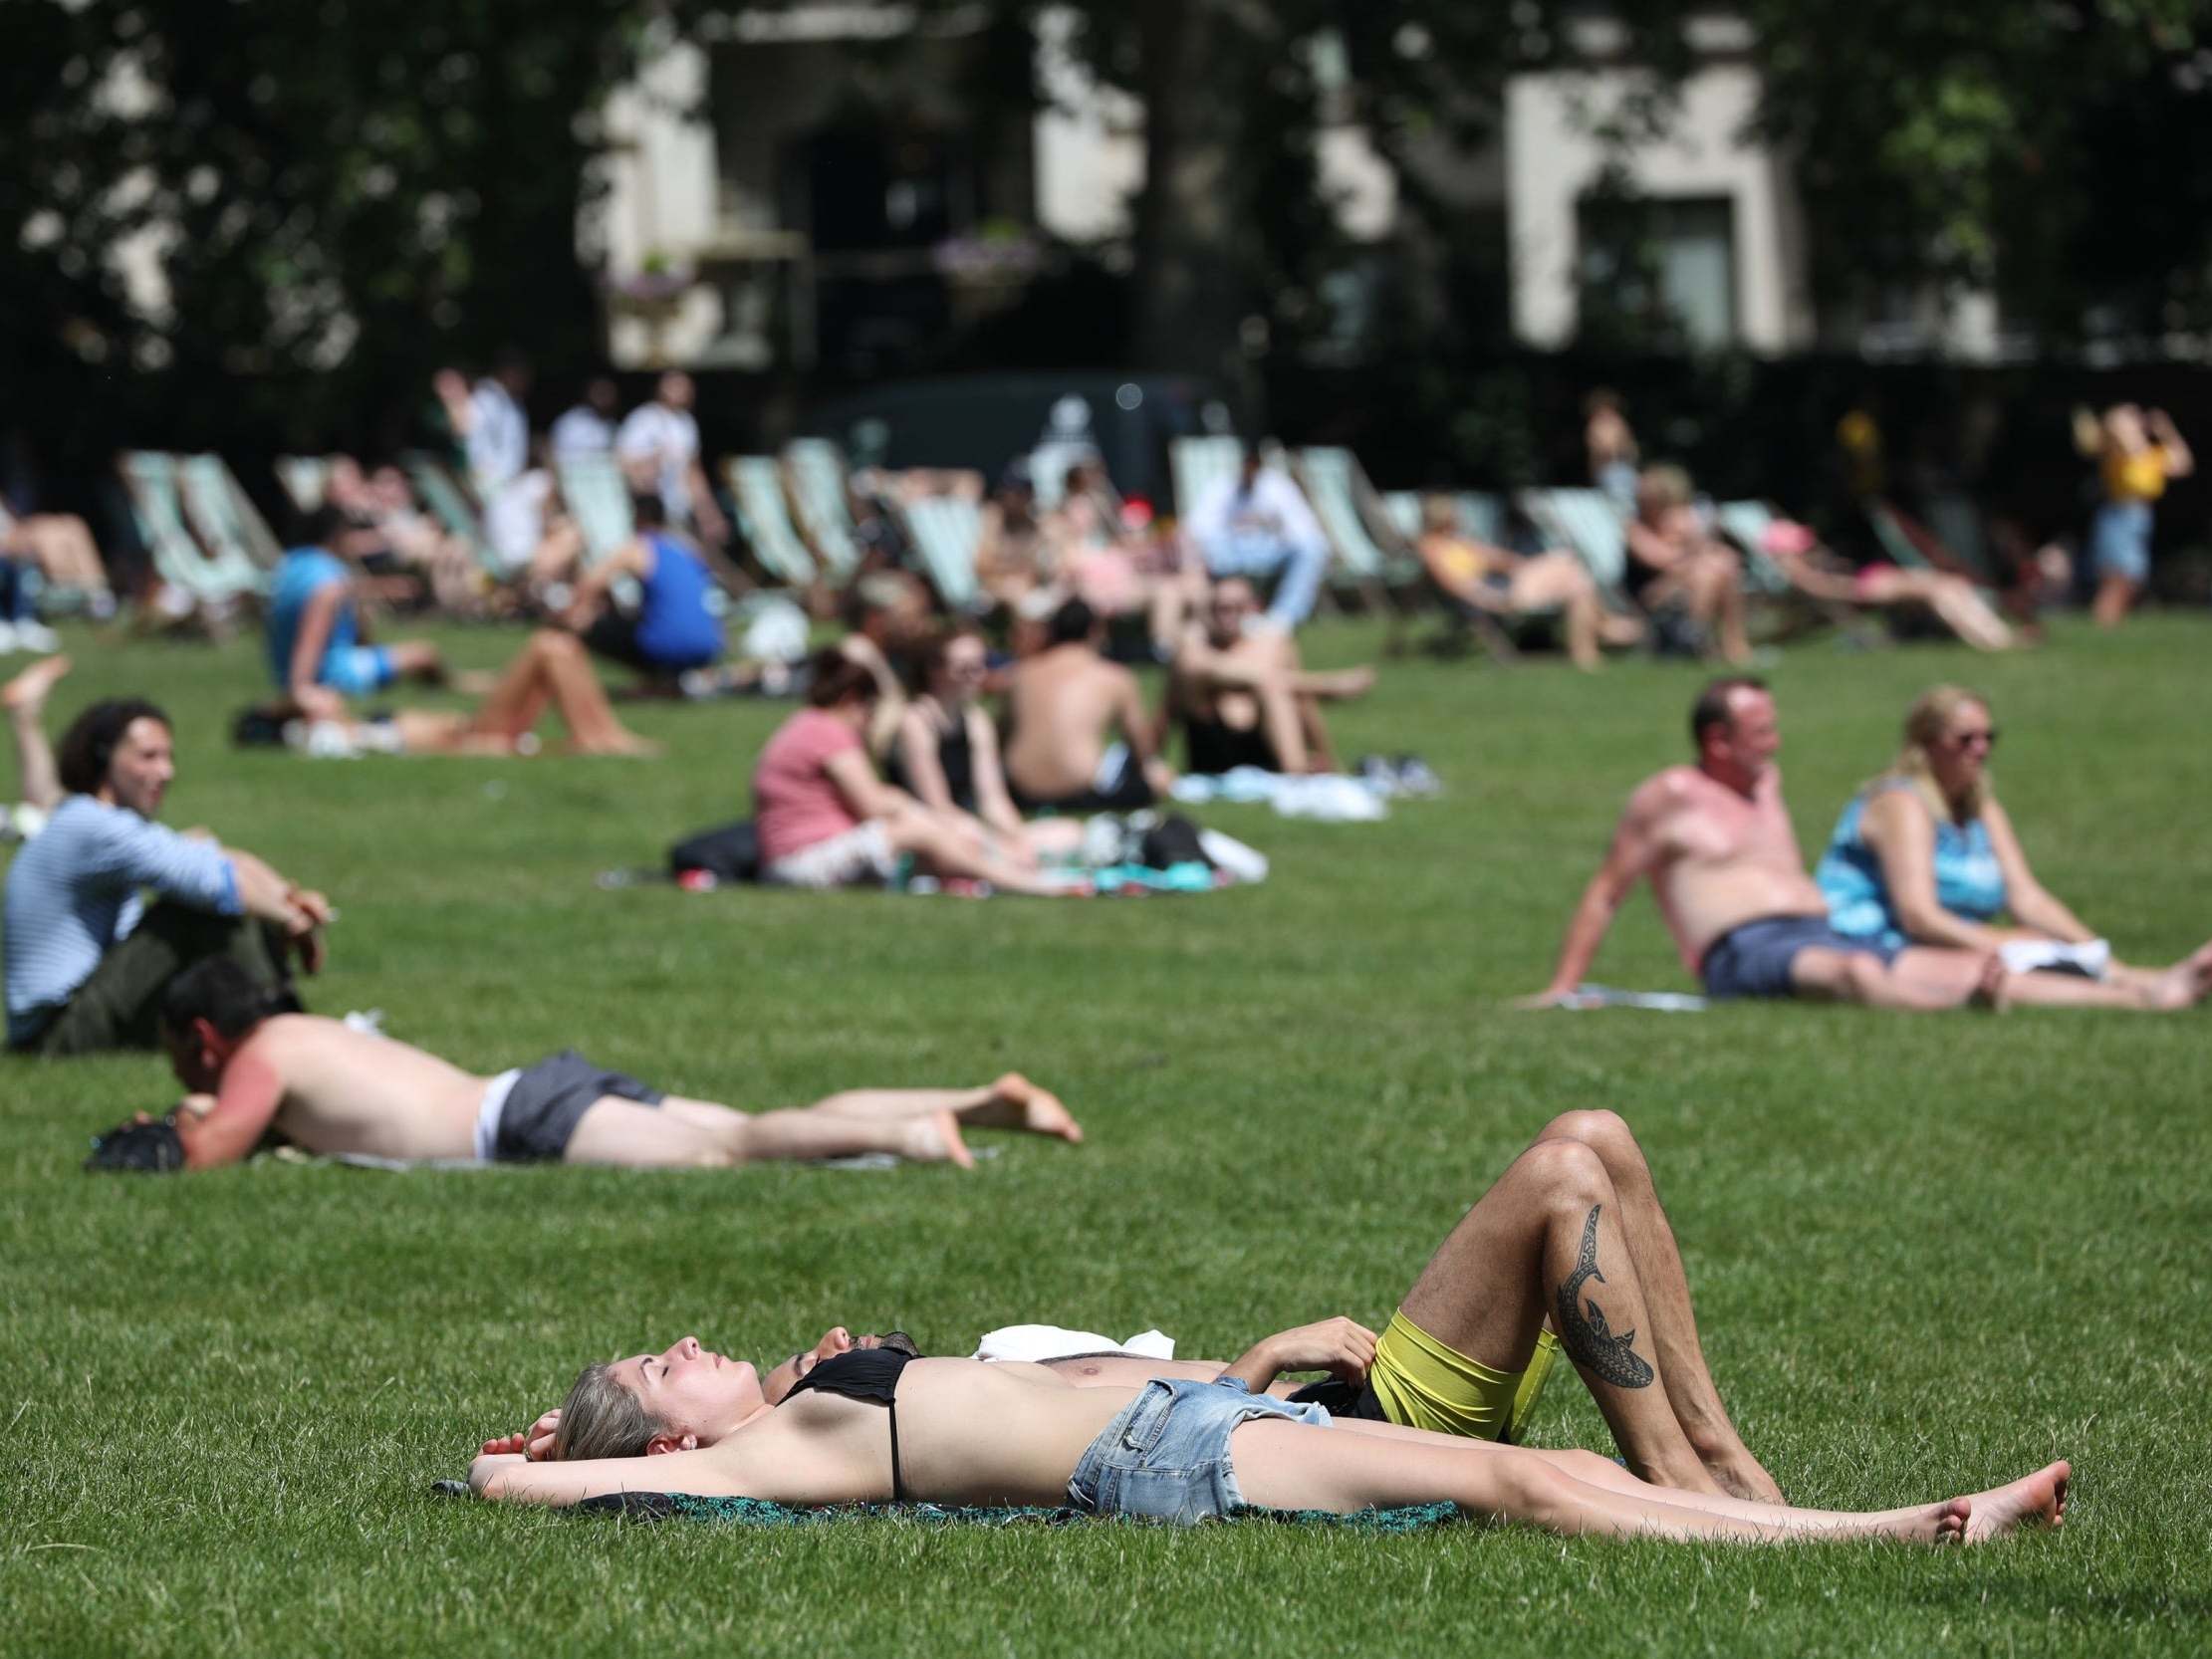 The UK has a greater chance of seeing milder, wetter winters and hotter, drier summers